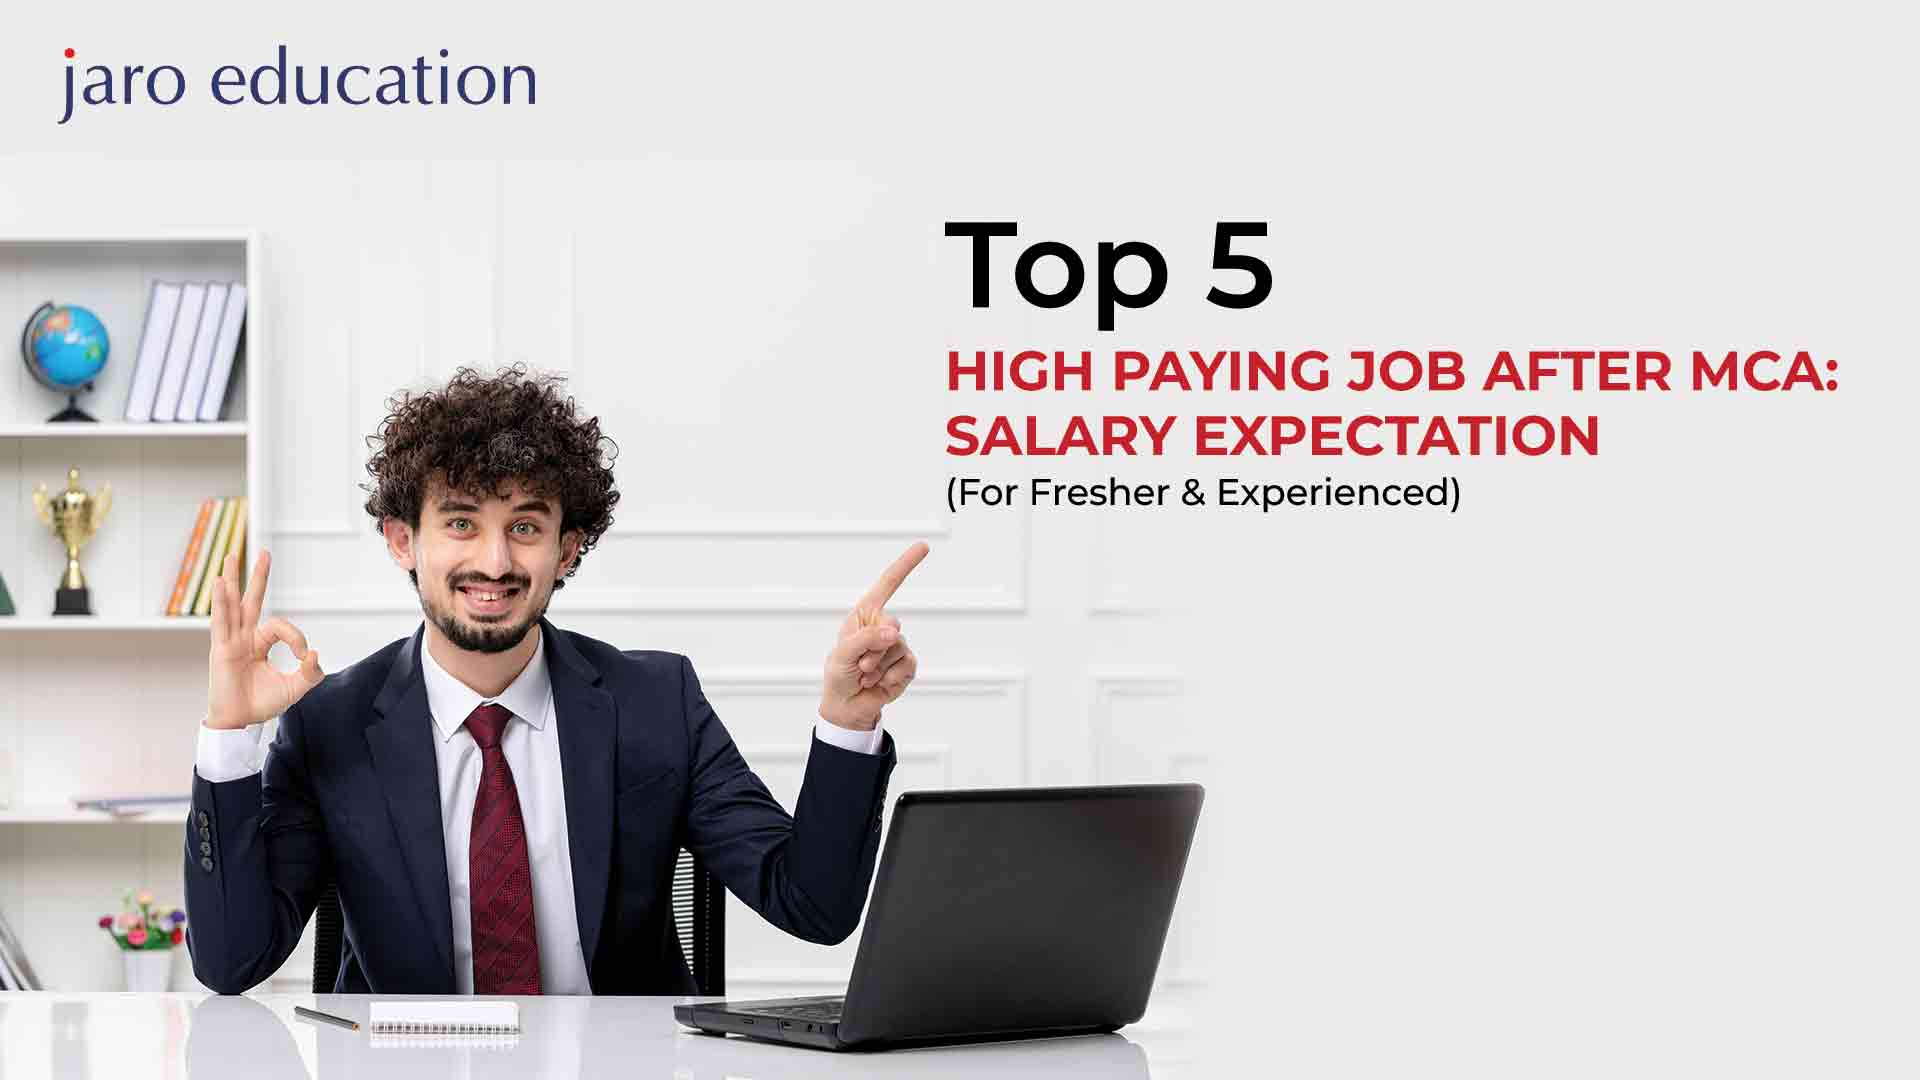 Top-5-High-Paying-Job-After-MCA-Salary-Expectation-(For-Fresher-&-Experienced)